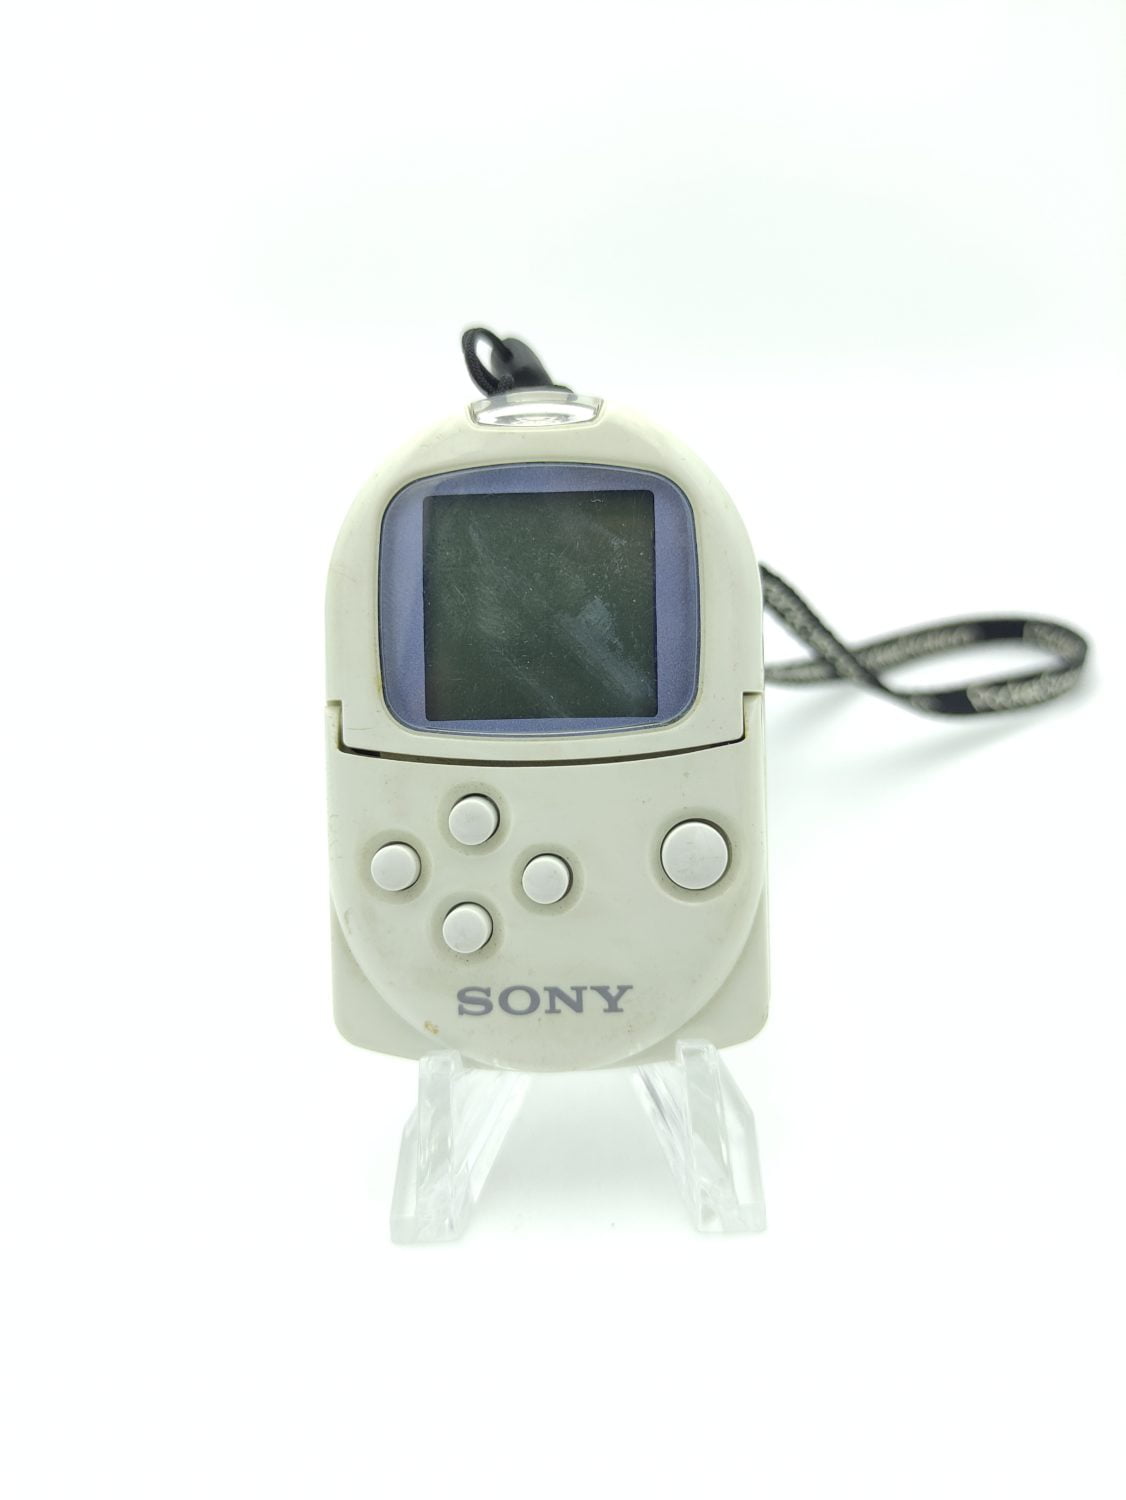 Sony Pocket Station memory card White SCPH-4000 Japan Boutique-Tamagotchis